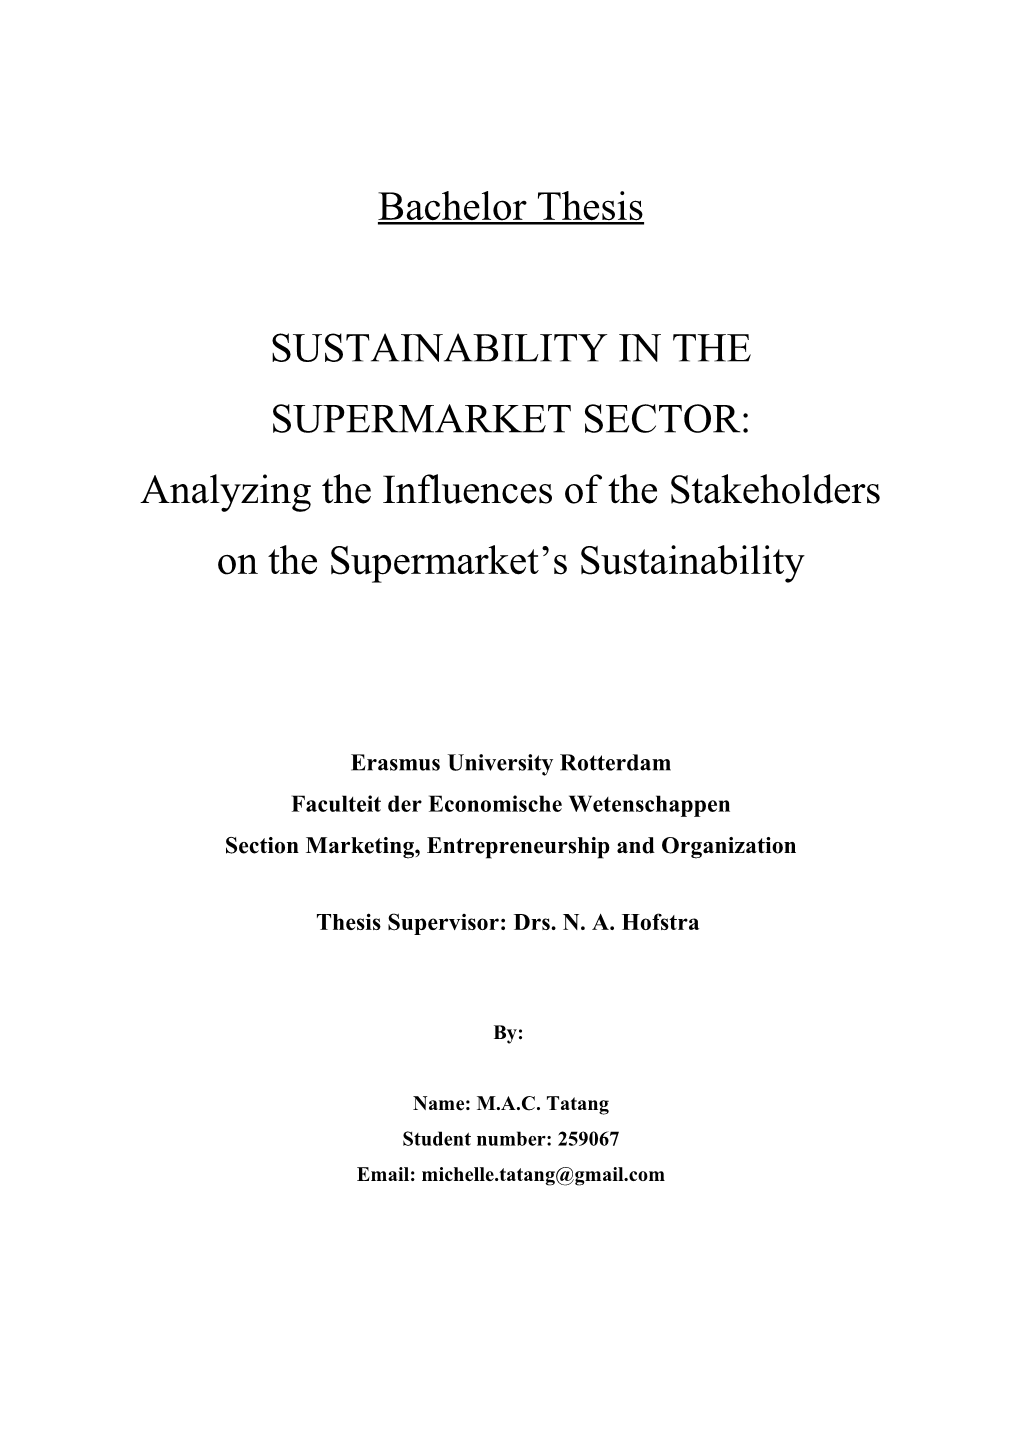 Sustainability in the Supermarket Sector:M.A.C.Tatang